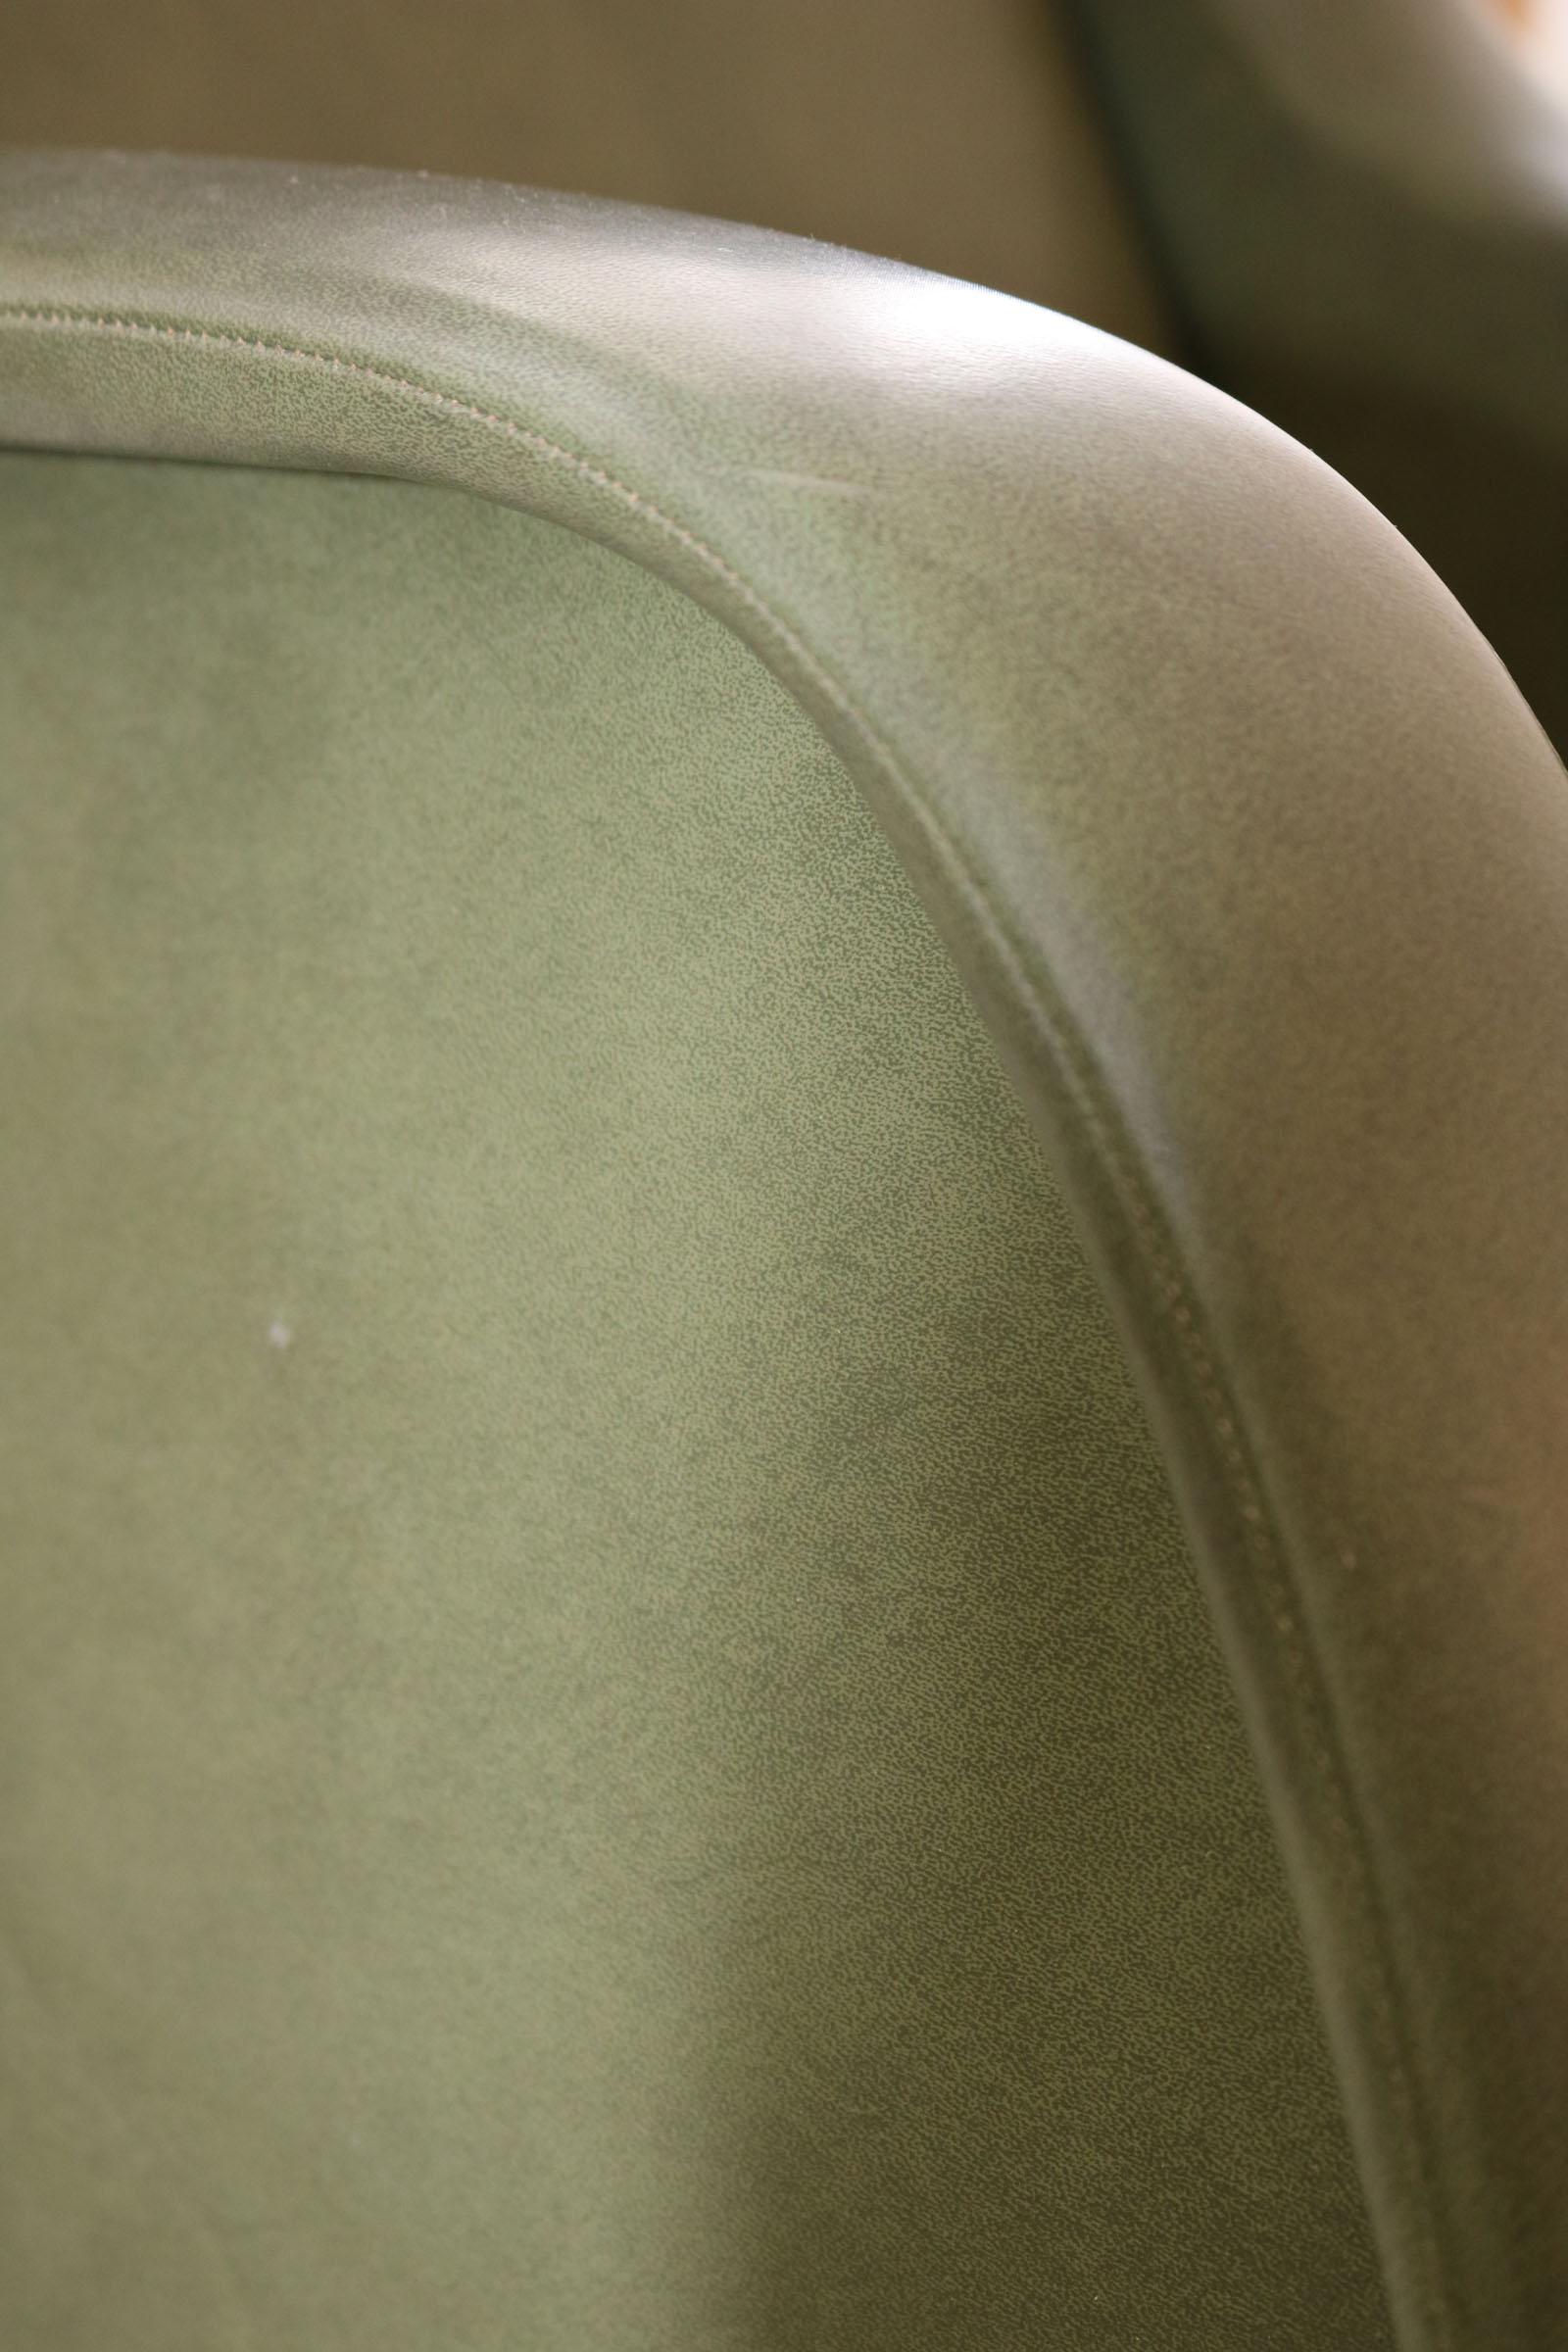 Pair of Italian Midcentury Armchairs in Original Green Fauxleather, 1950s For Sale 1